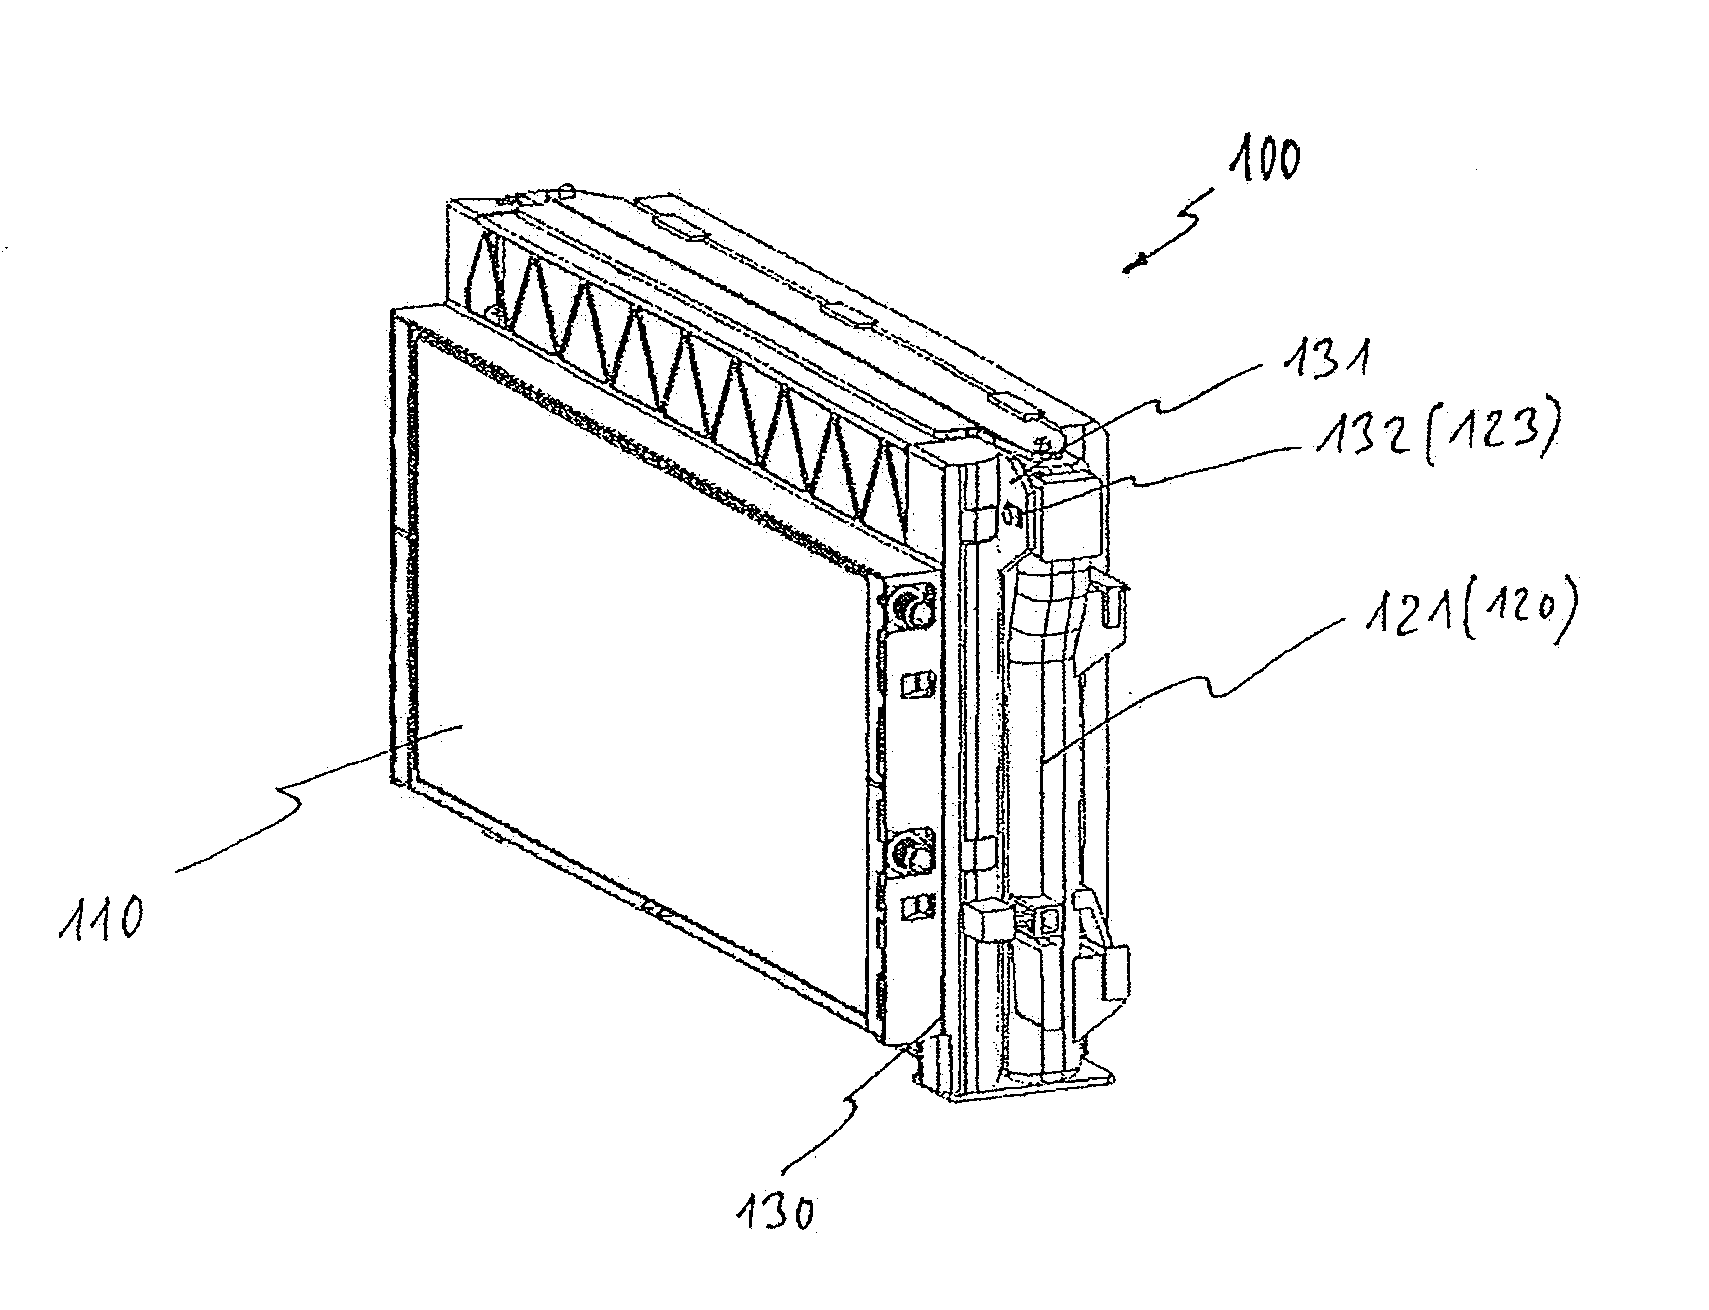 Cooling module and pair of adapters for module standardization